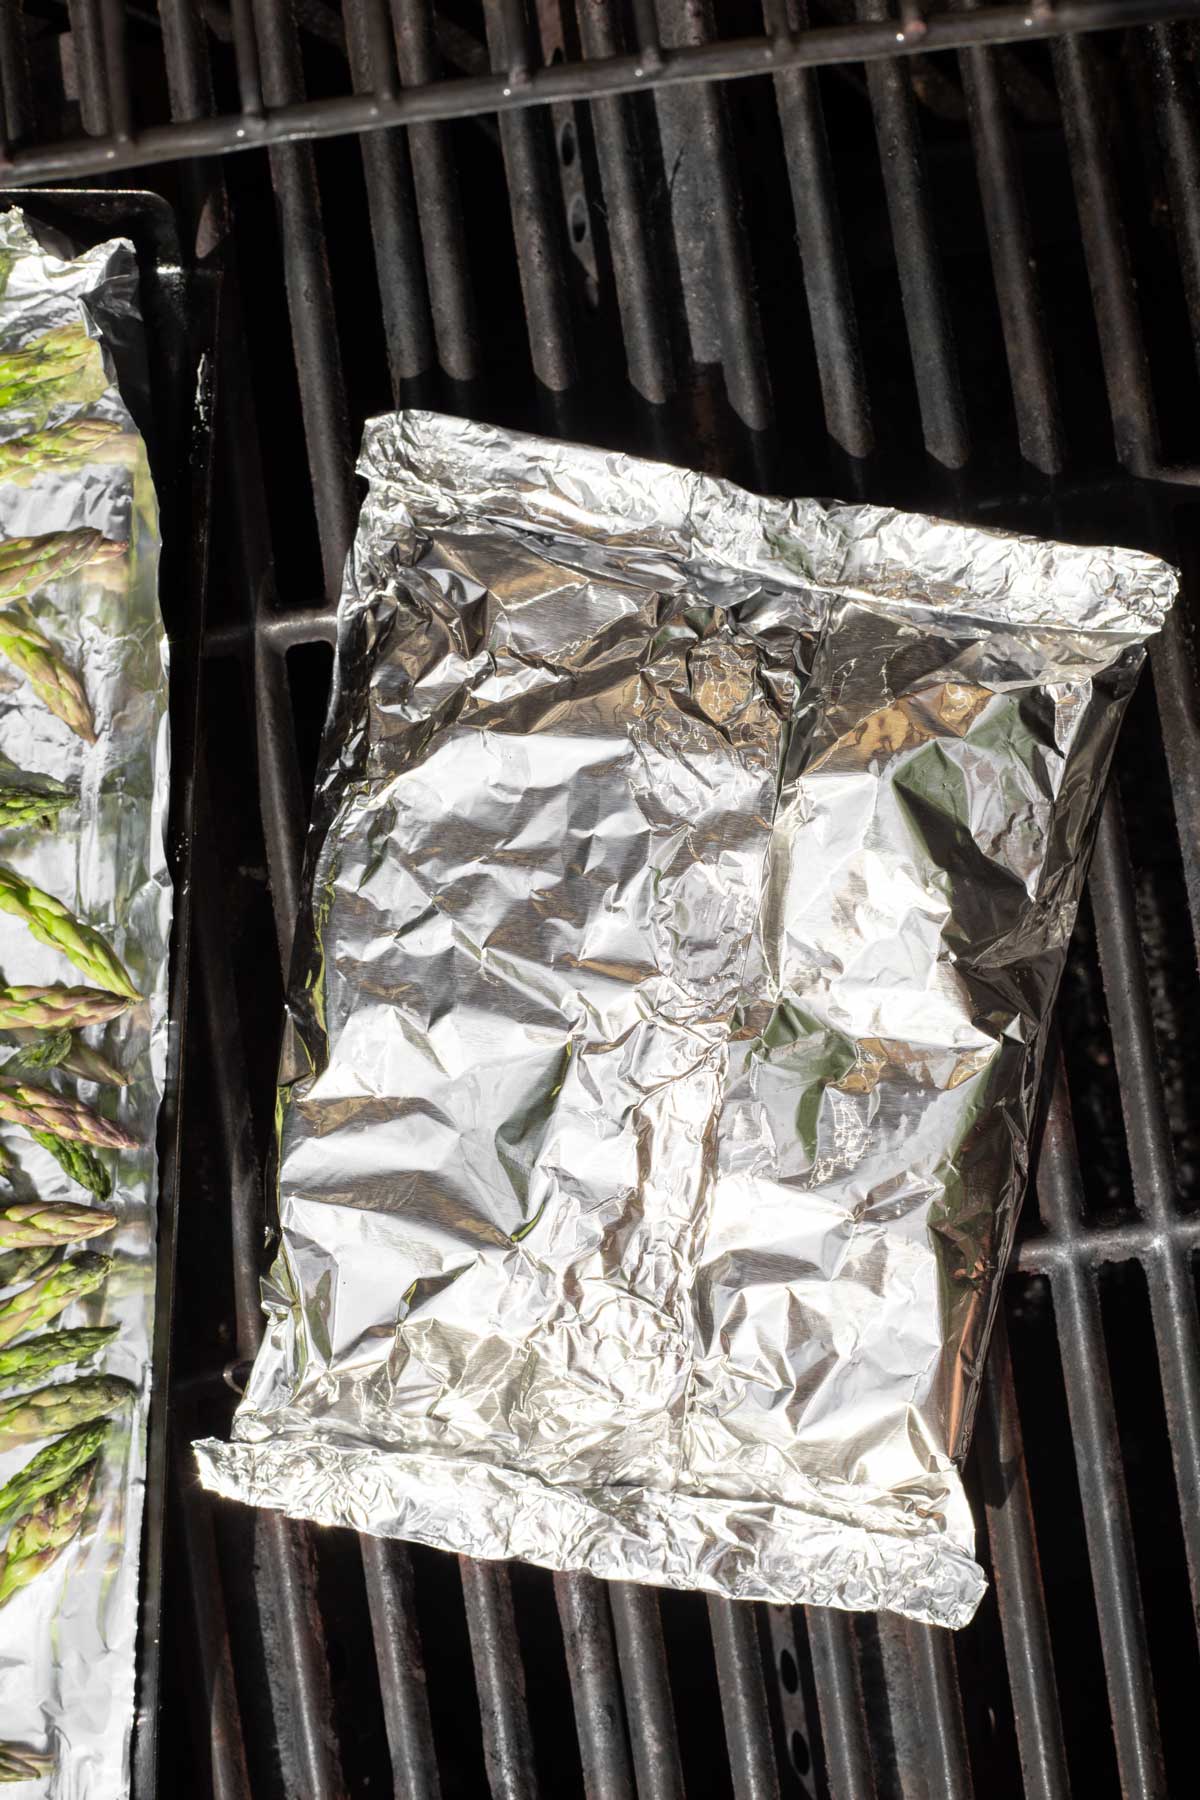 Foil packet on grill.